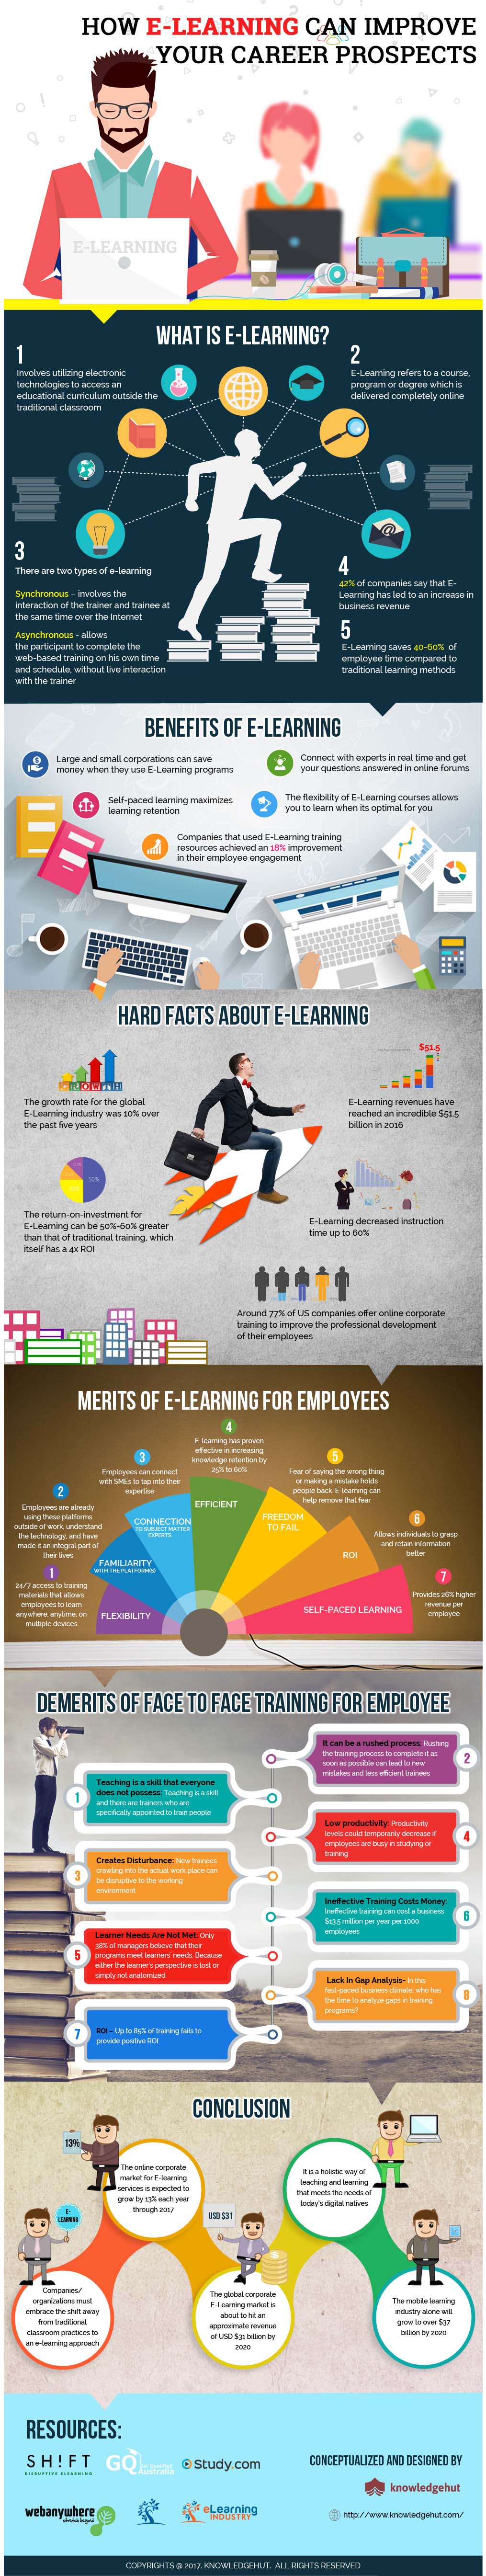 How E-Learning Can Help Improve Your Career Prospects